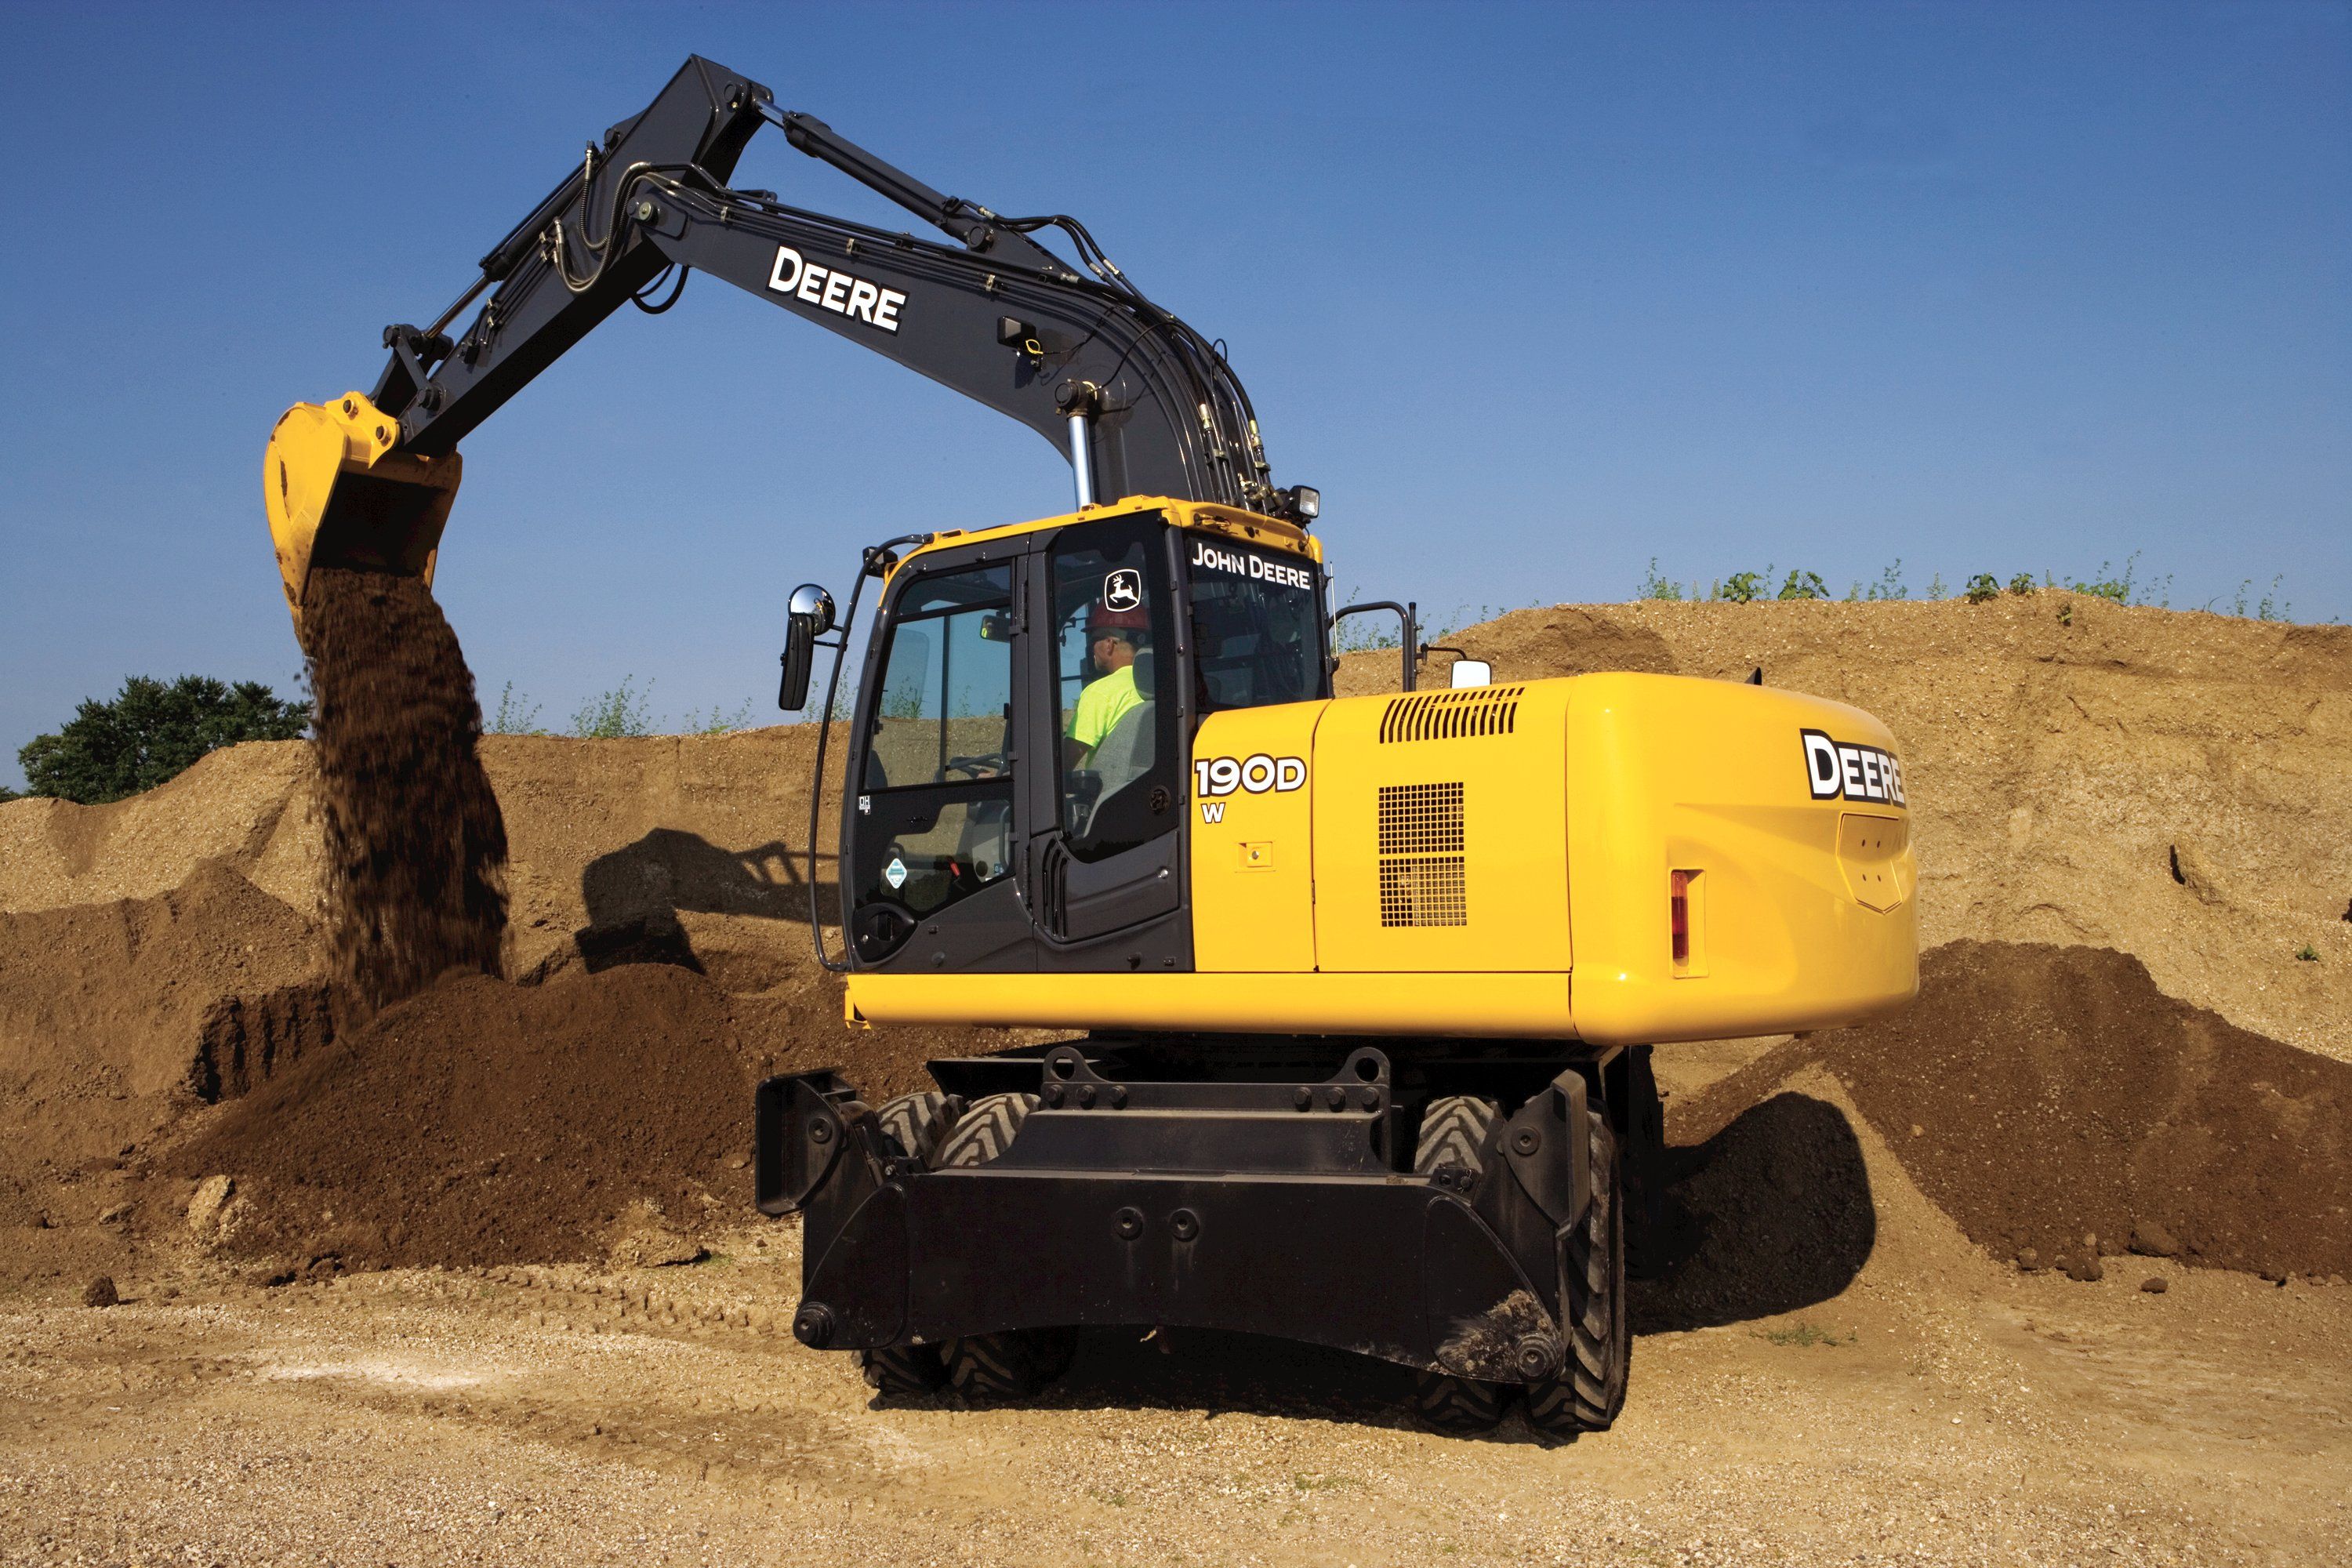 Construction Equipment Market Size, Share, Trends, Outlook, Growth and Forecast to 2021-2026